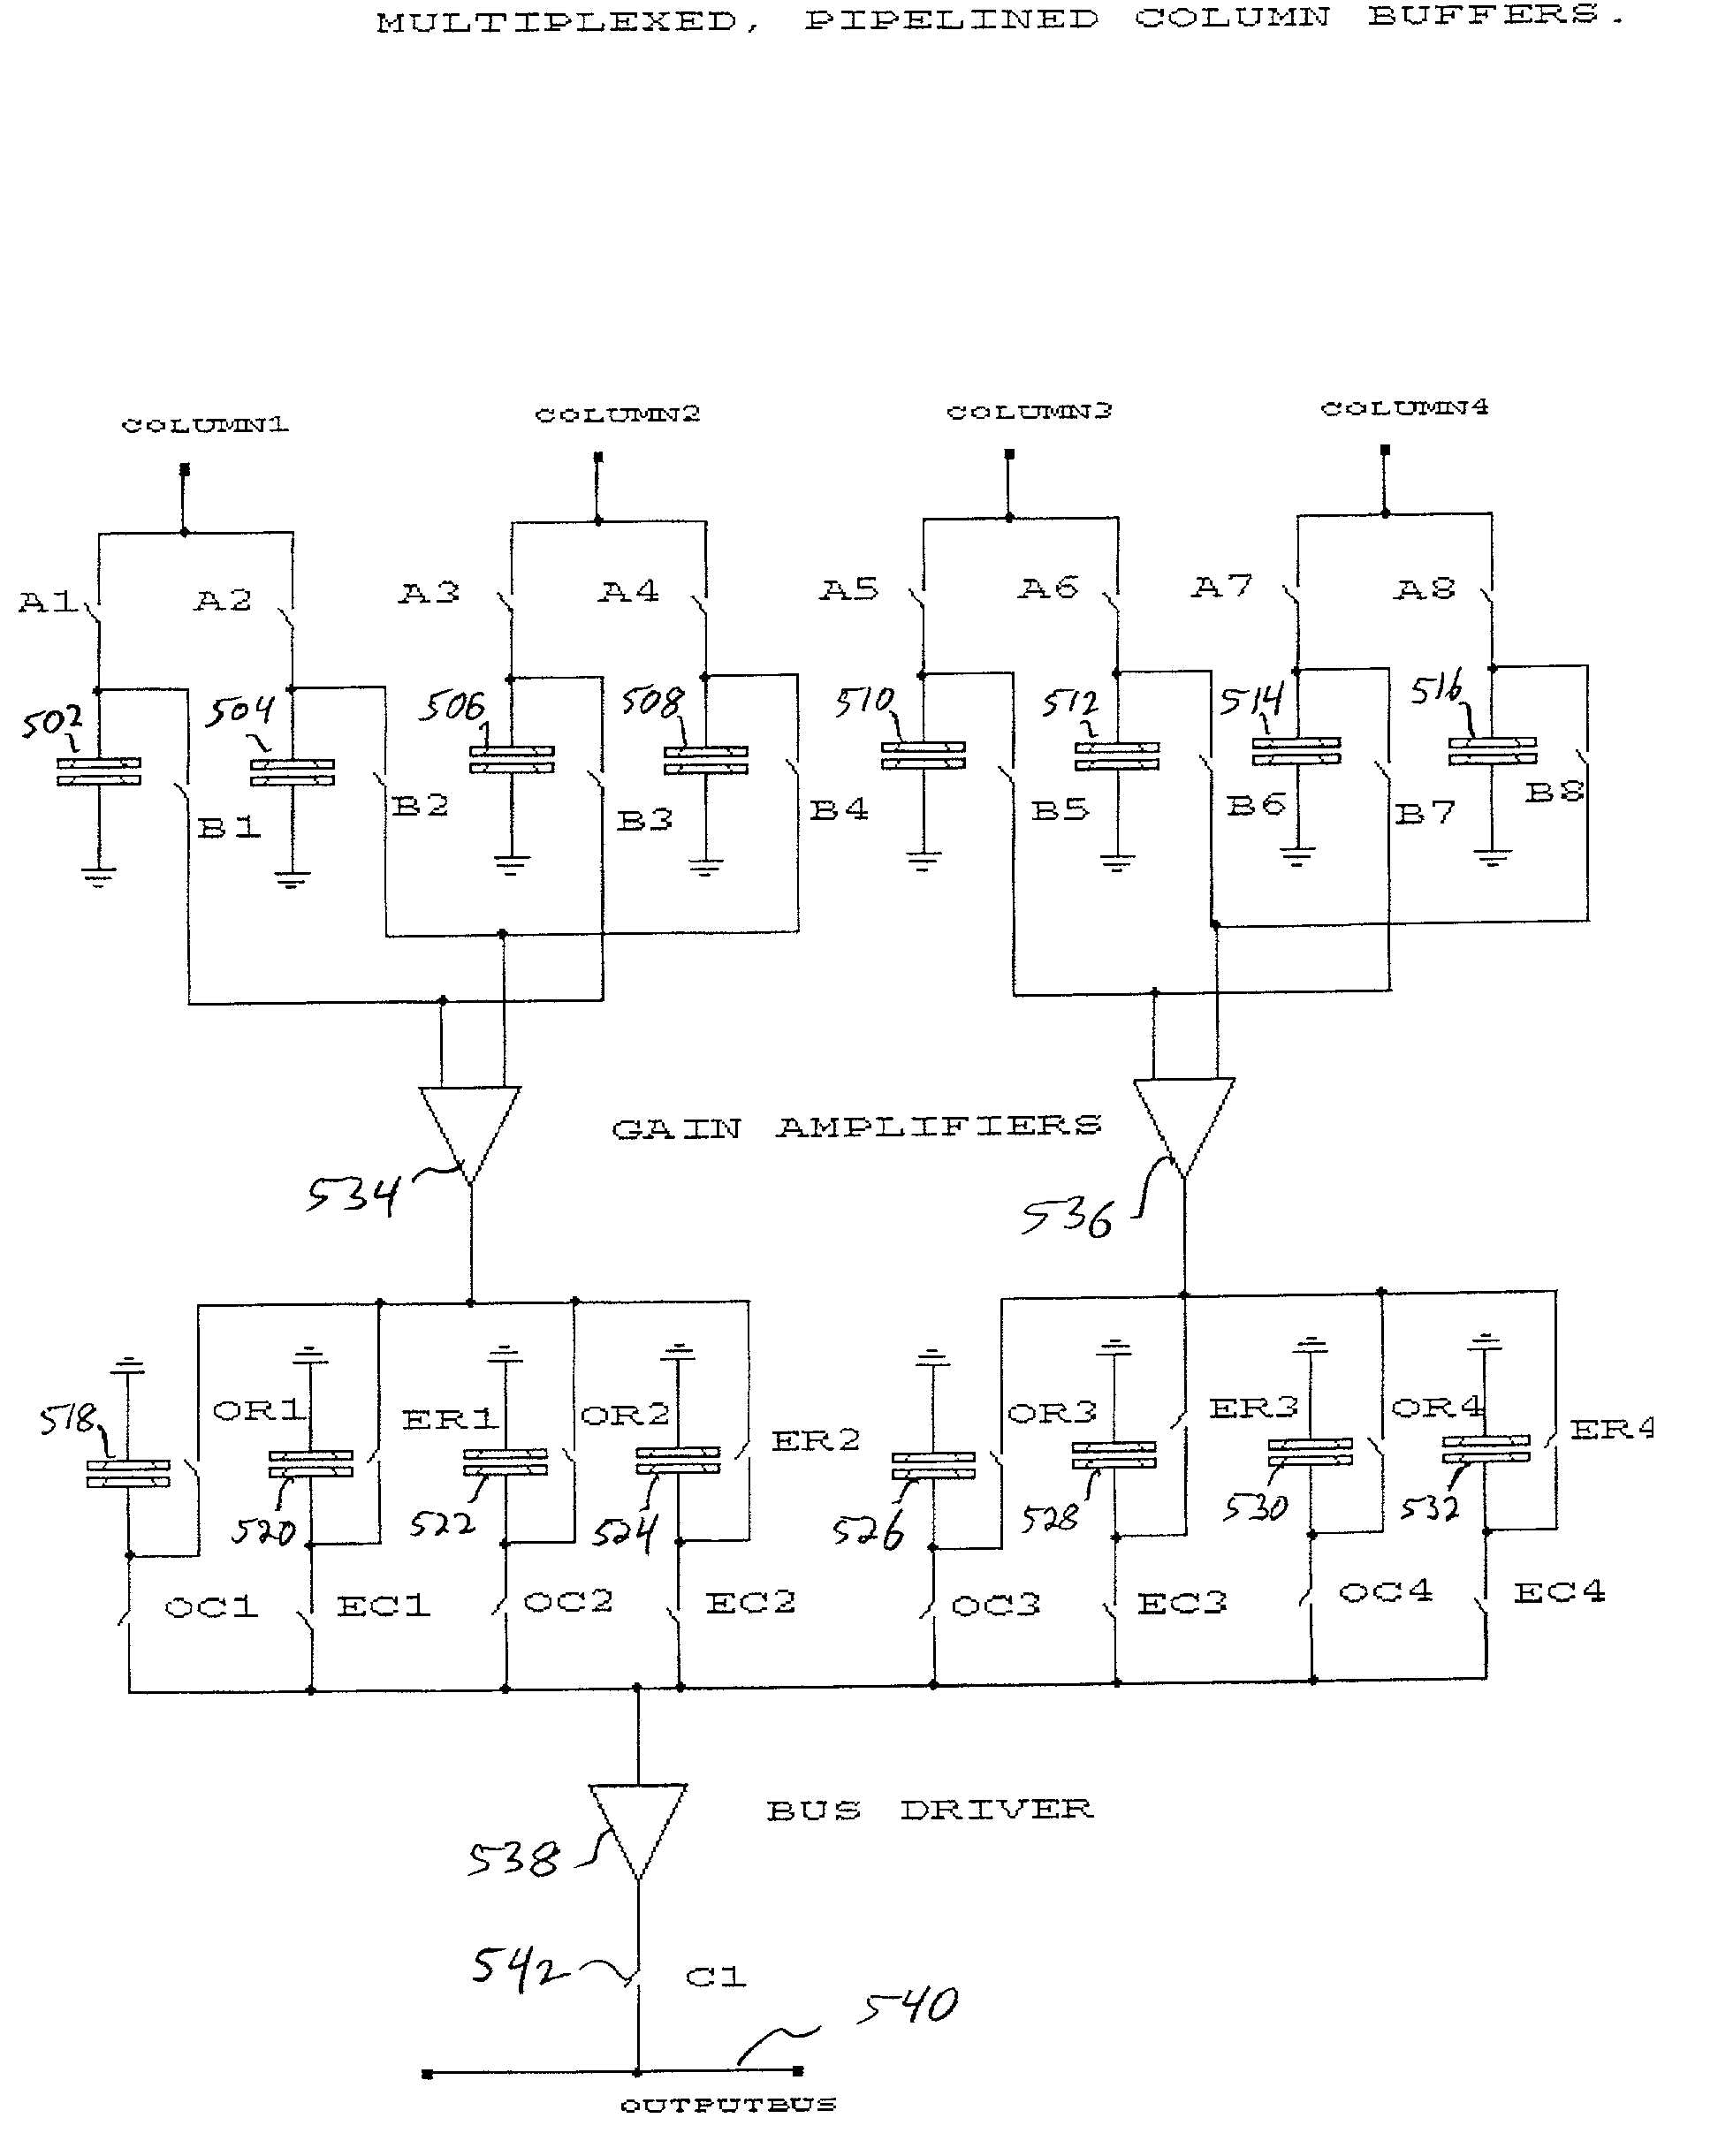 Multiplexed and pipelined column buffer for use with an array of photo sensors